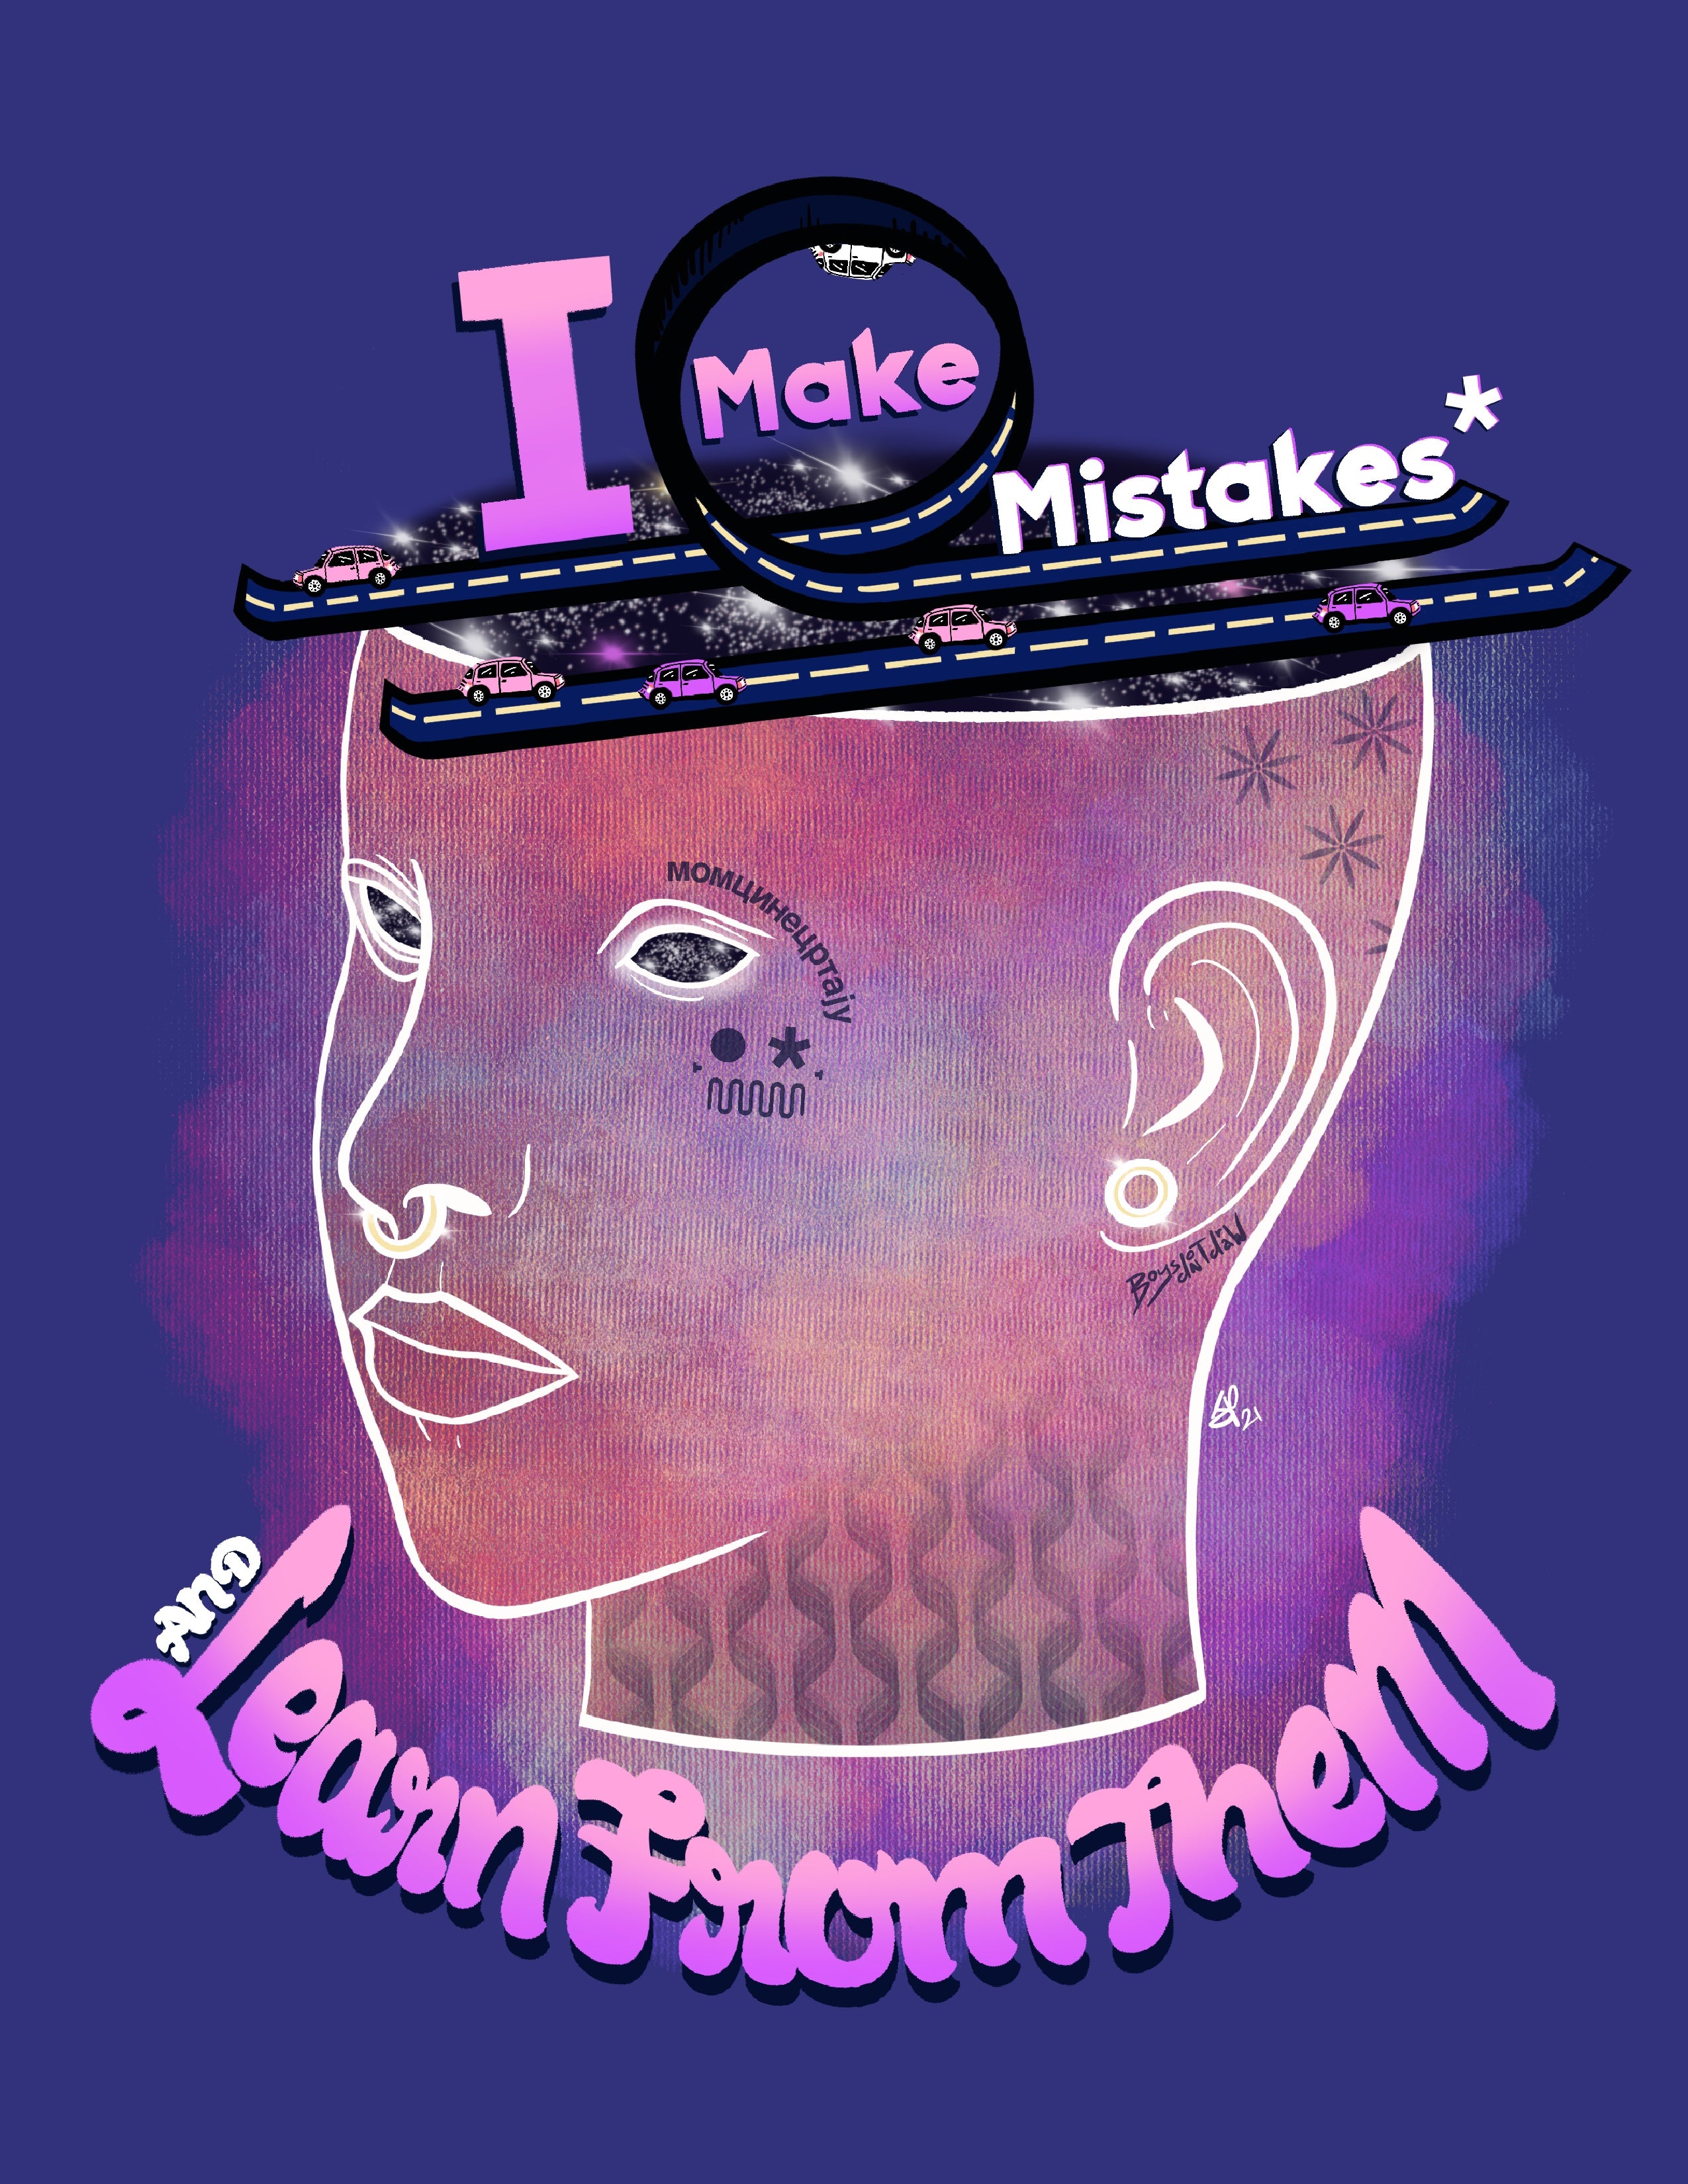 I MAKE MISTAKES AND LEARN FROM THEM - Limited Print by BOYSDONTDRAW